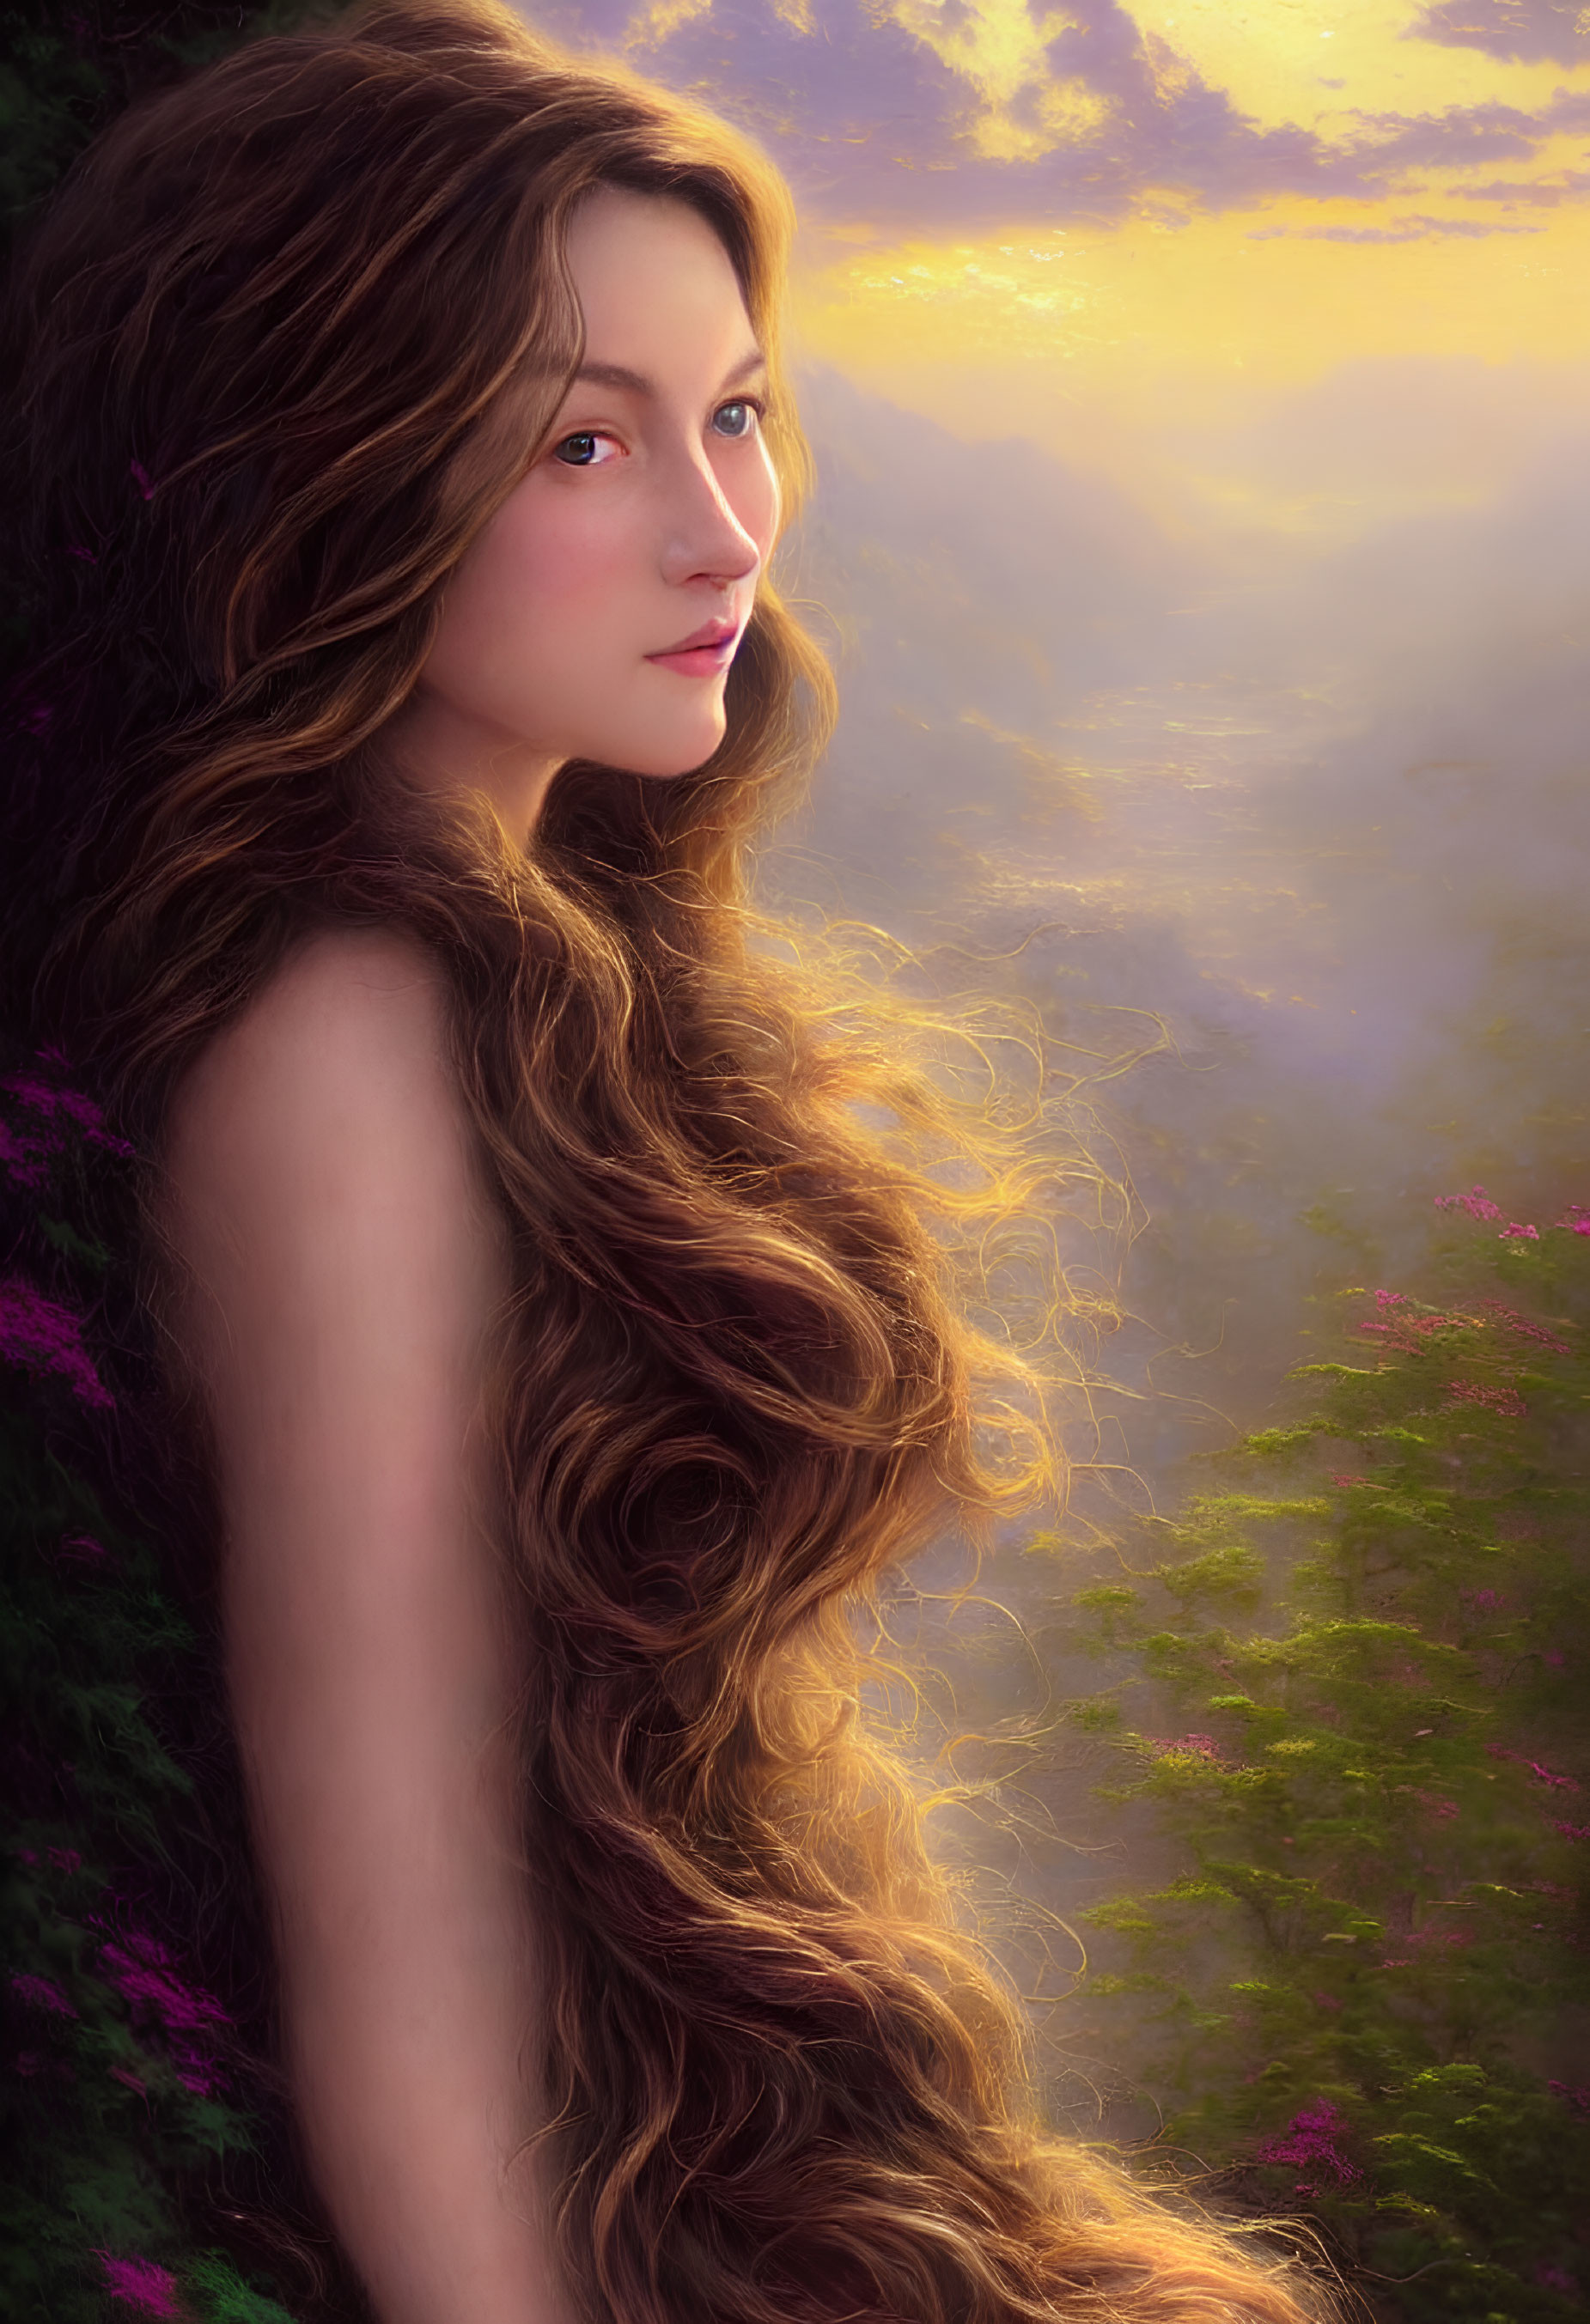 Young Woman Portrait with Long Curly Hair in Sunset Background